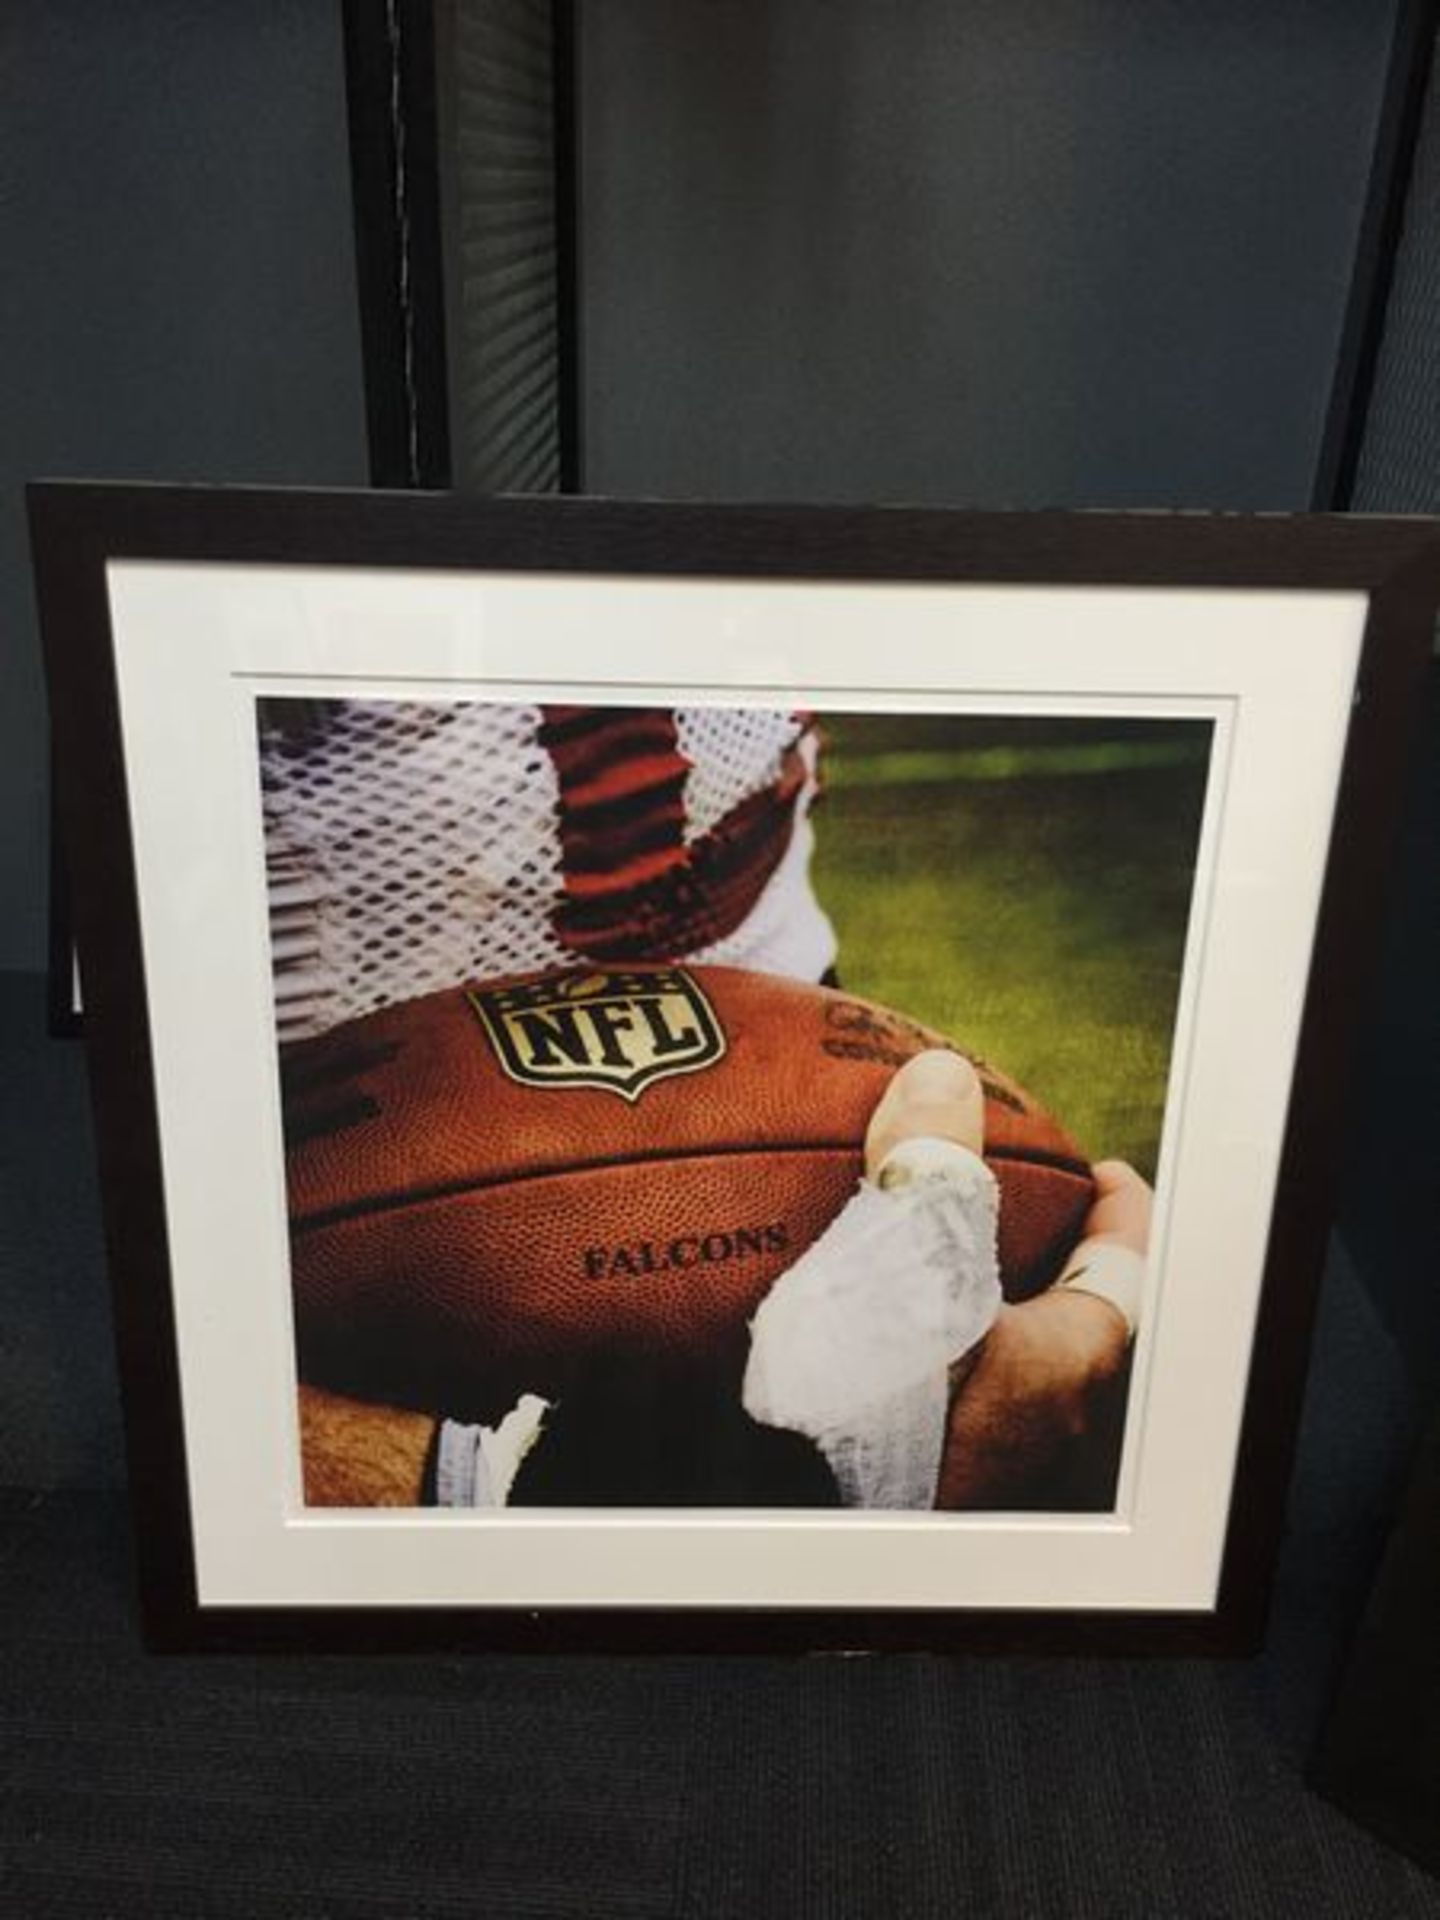 Falcons Football Picture 36 inch x 36 inch. / GA DOME ITEM / This item includes Georgia Dome